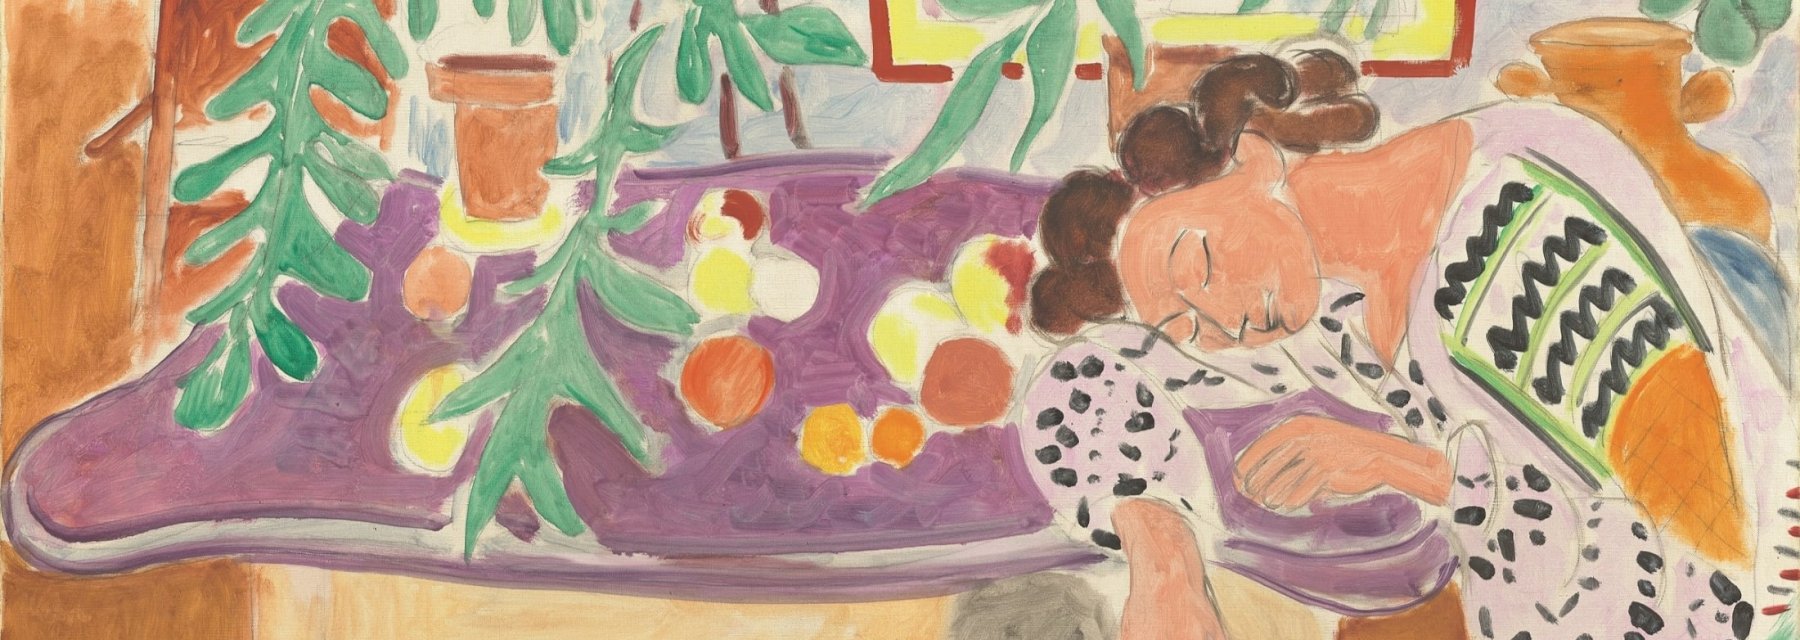 Exhibitions to see in Paris this Spring: Celebrating French artists Matisse, Manet, and Degas